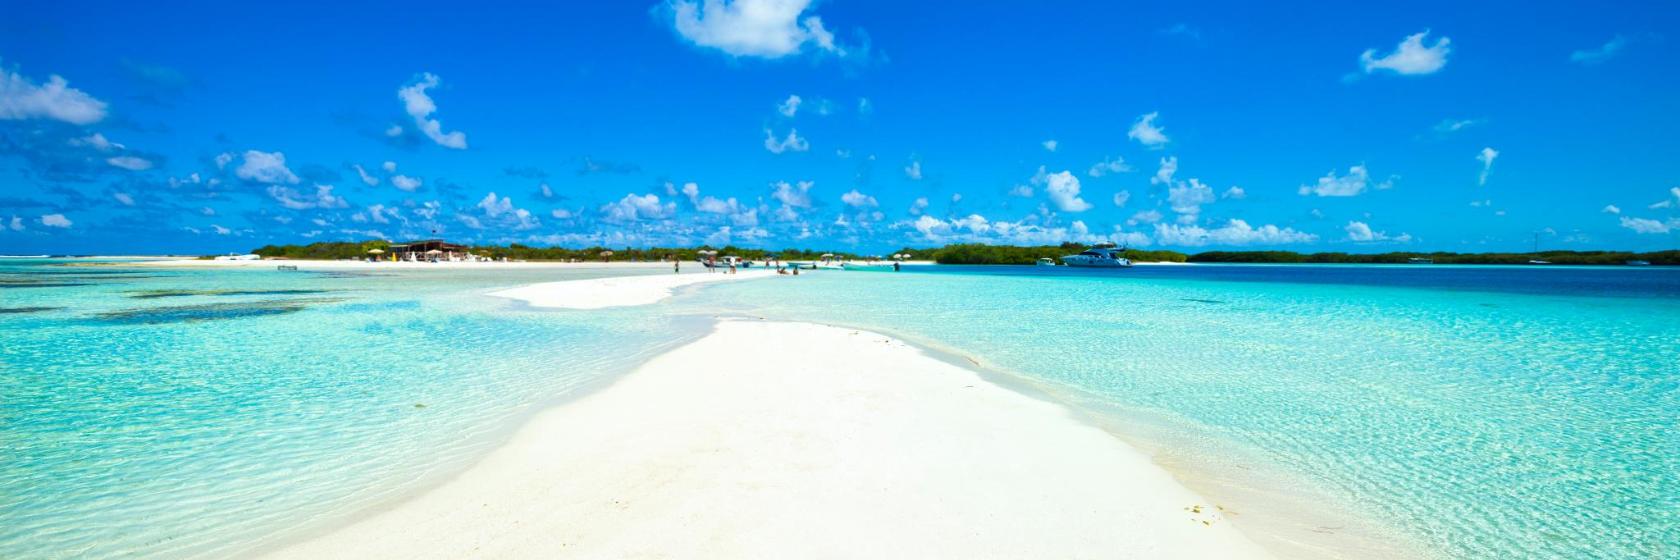 The 10 best Los Roques hotels | Where to stay in 2021 | Booking.com